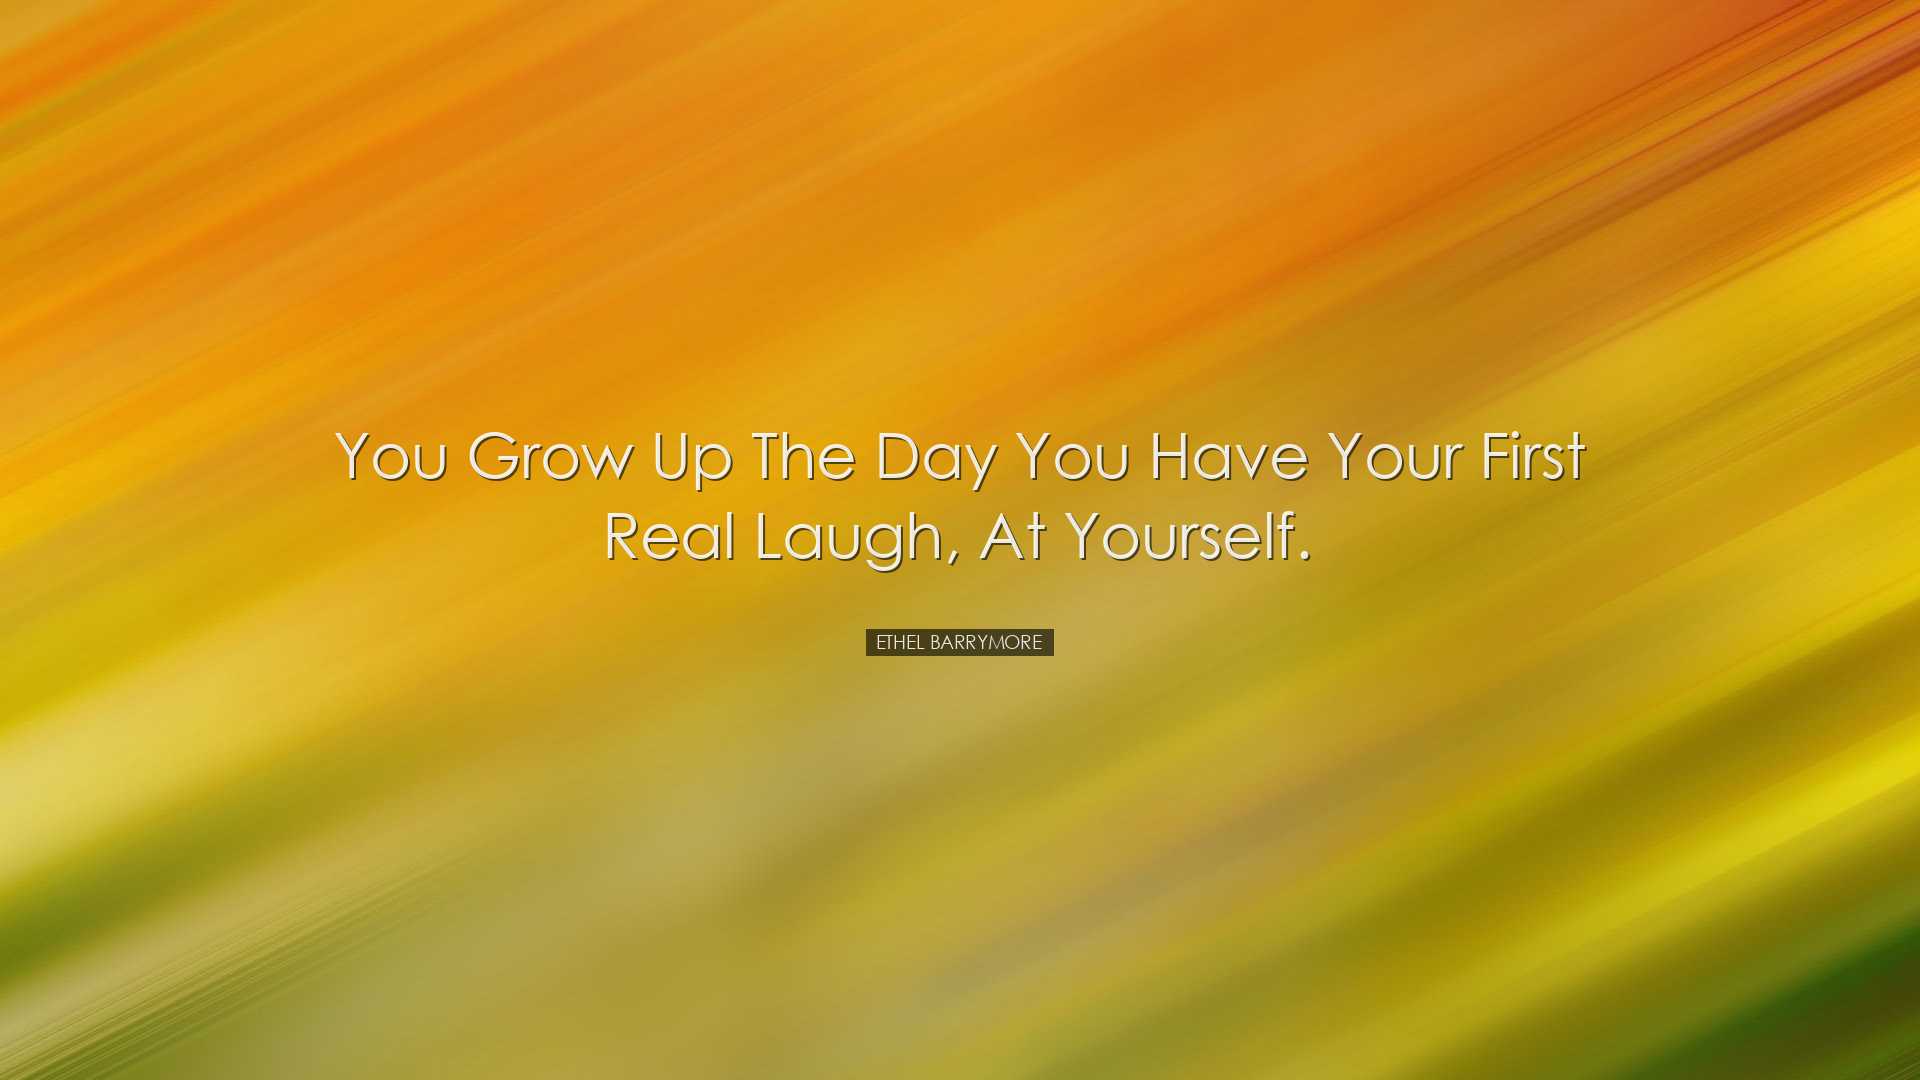 You grow up the day you have your first real laugh, at yourself. -